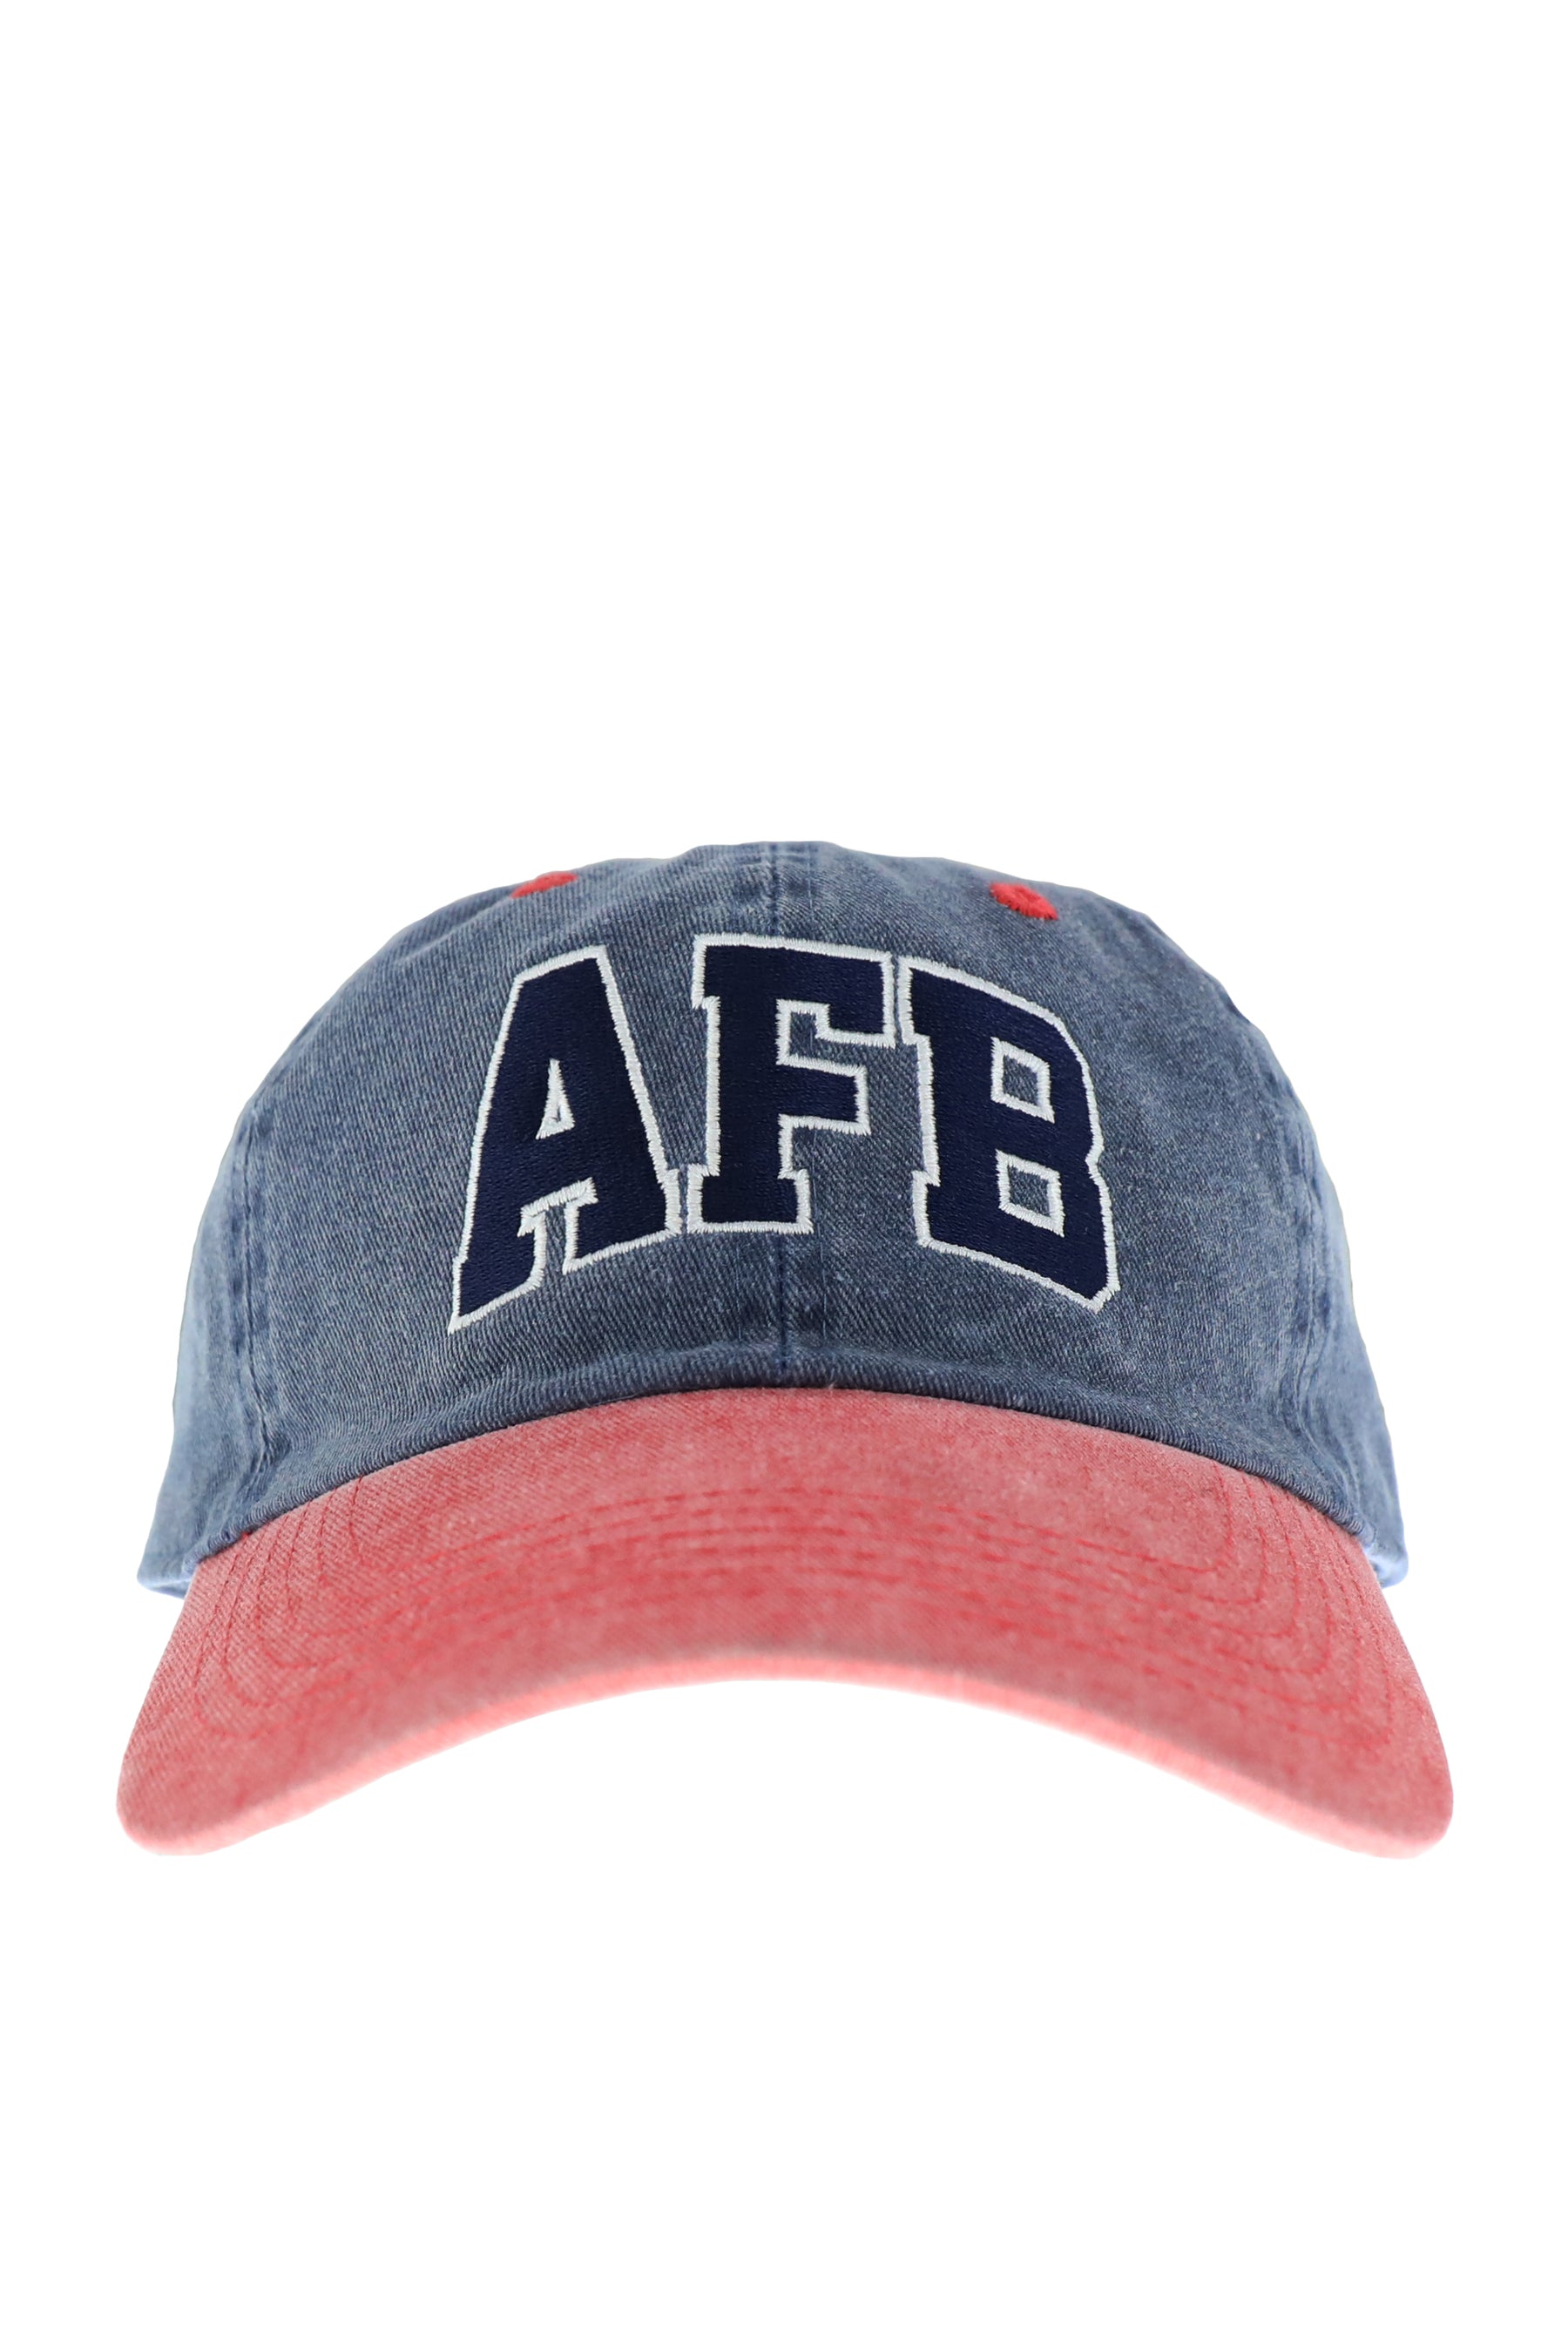 LOGO / AFB RED -NUBIAN NVY SS23 / CAP CLASSIC